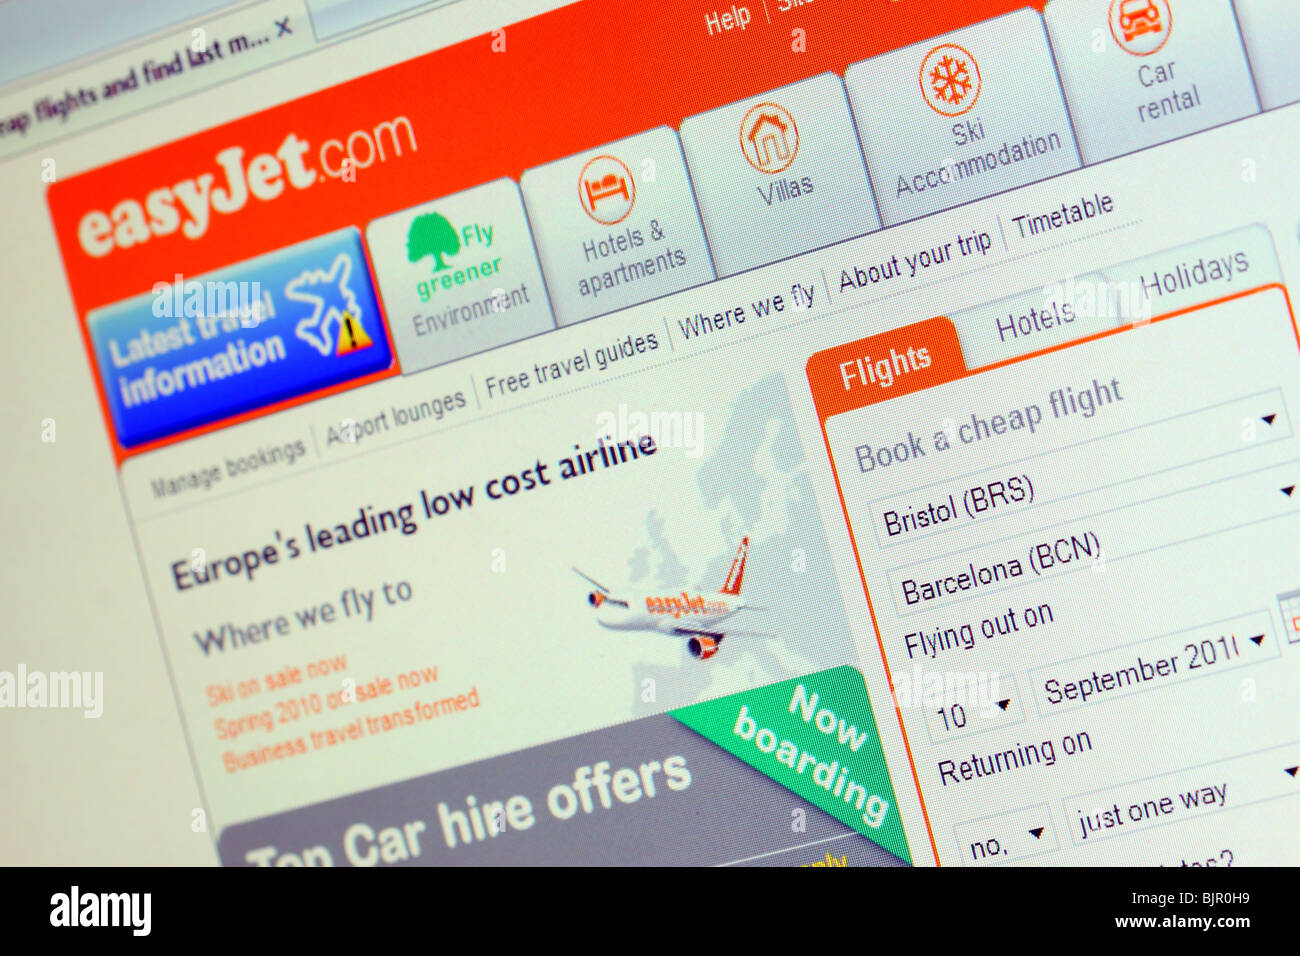 Easyjet airline online website web page home page internet  flight booking  screen Stock Photo